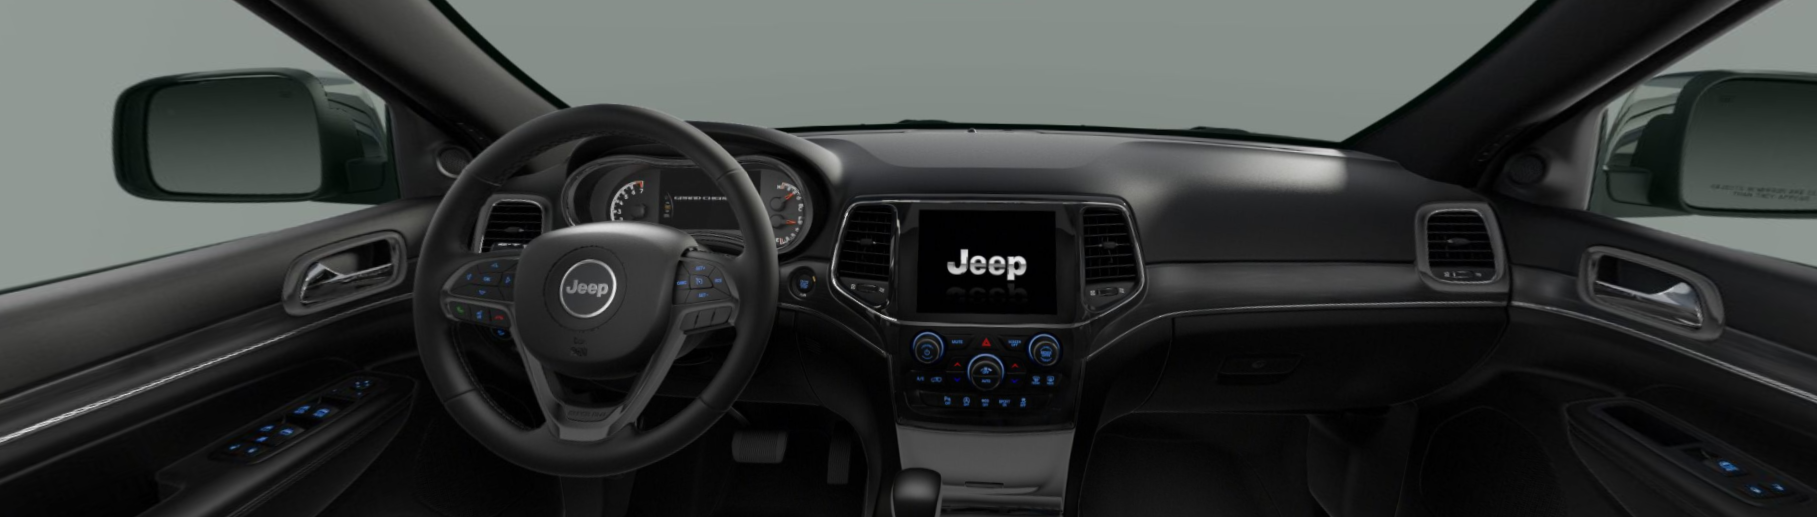 2020 Jeep Grand Cherokee Limited Front View Interior Dash Picture